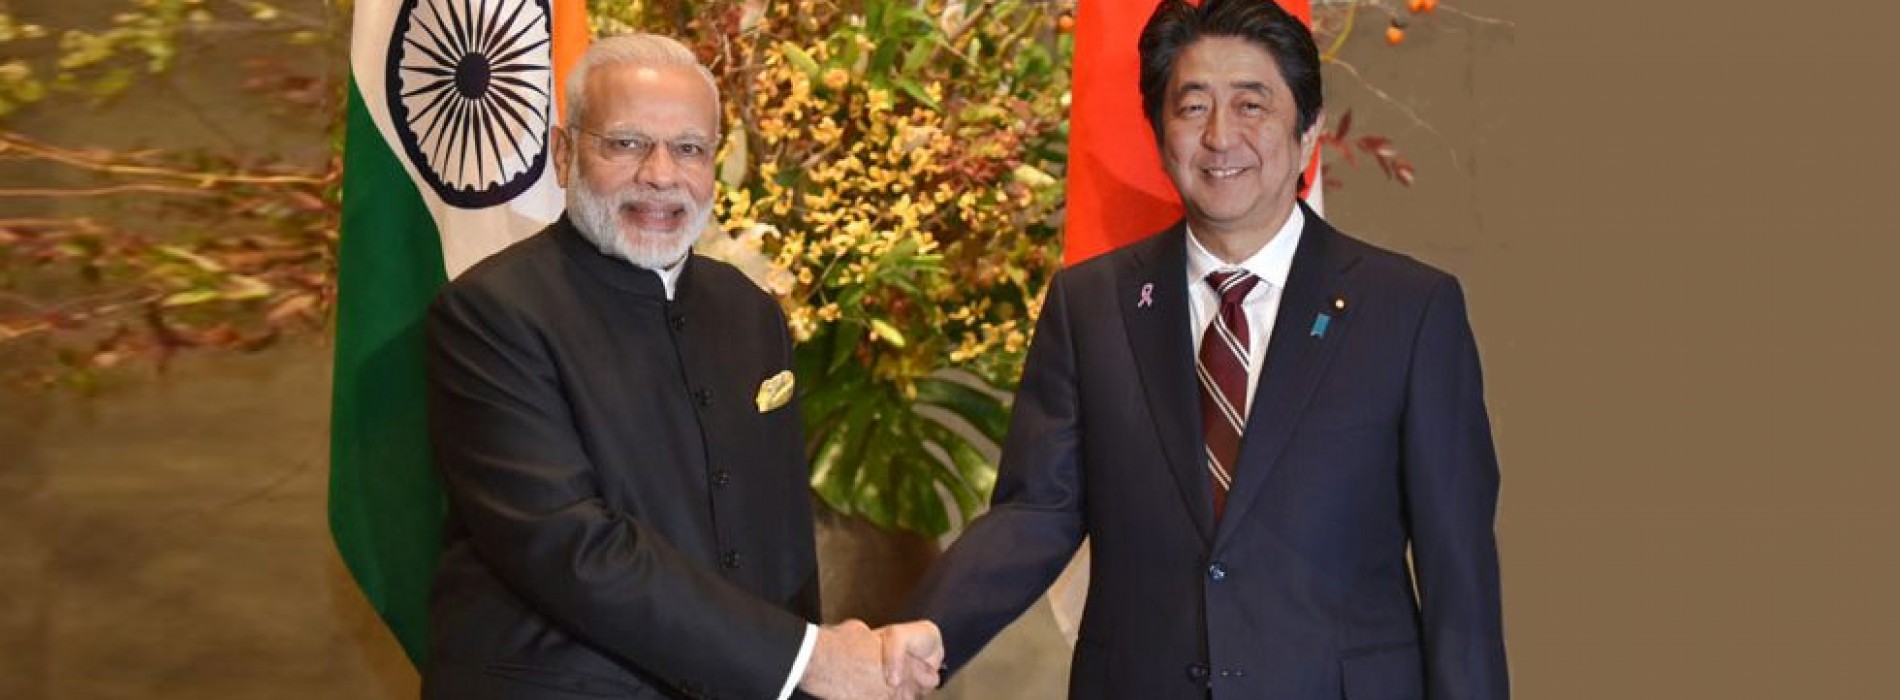 Shinzo Abe will undertake a two-day official visit to India from today to hold the annual India-Japan Summit